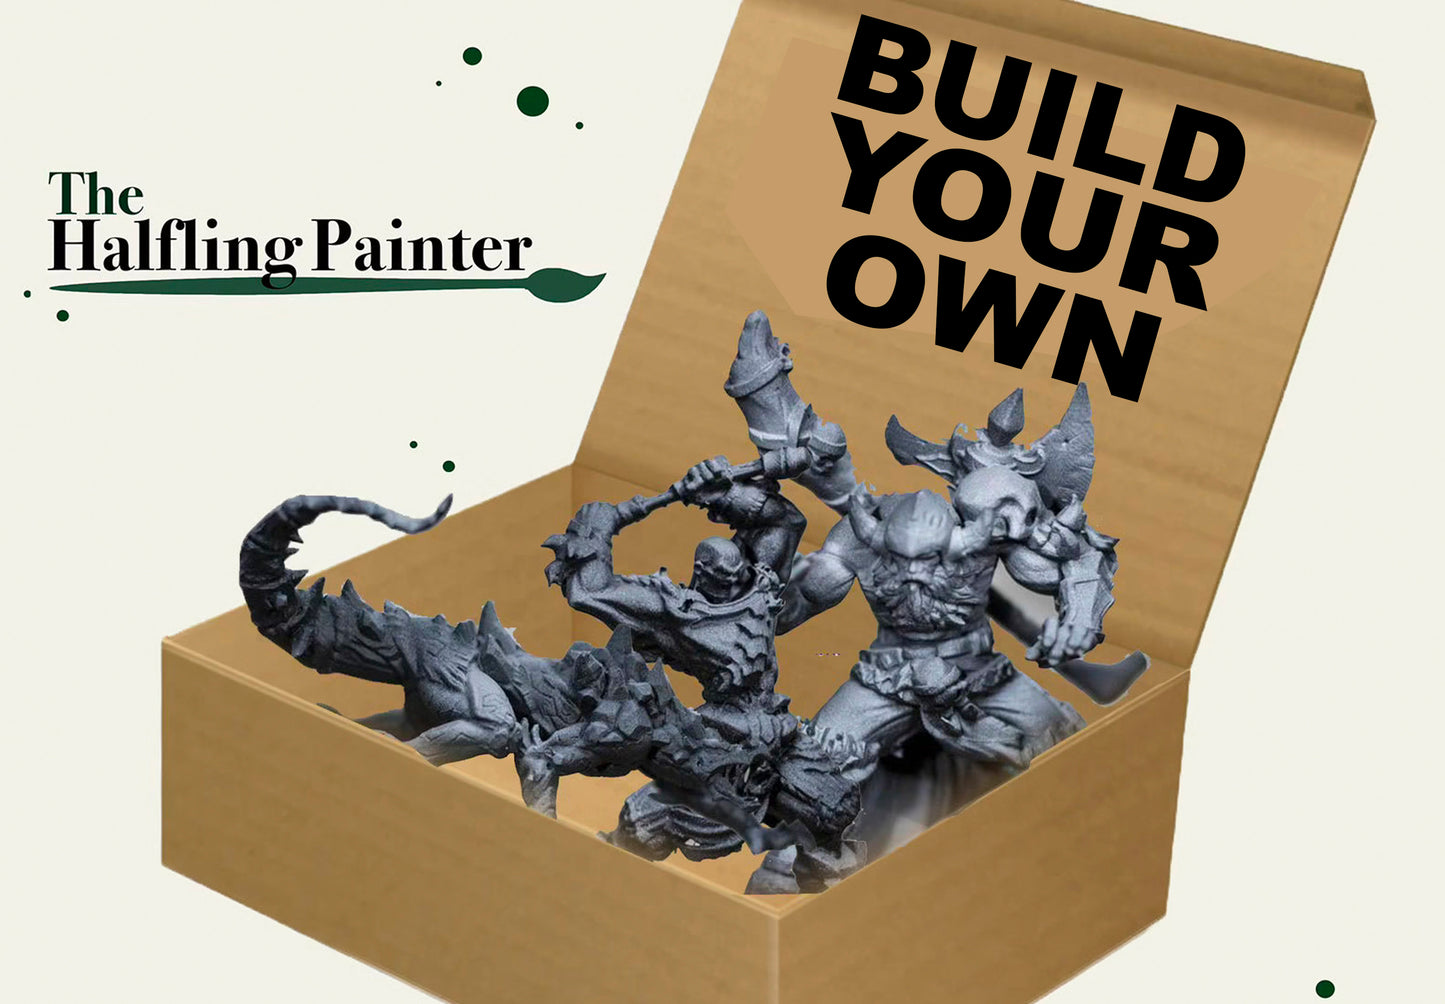 Build Your Own Bundle - Large models - For Table Top Gaming | Dungeons & Dragons | Pathfinder